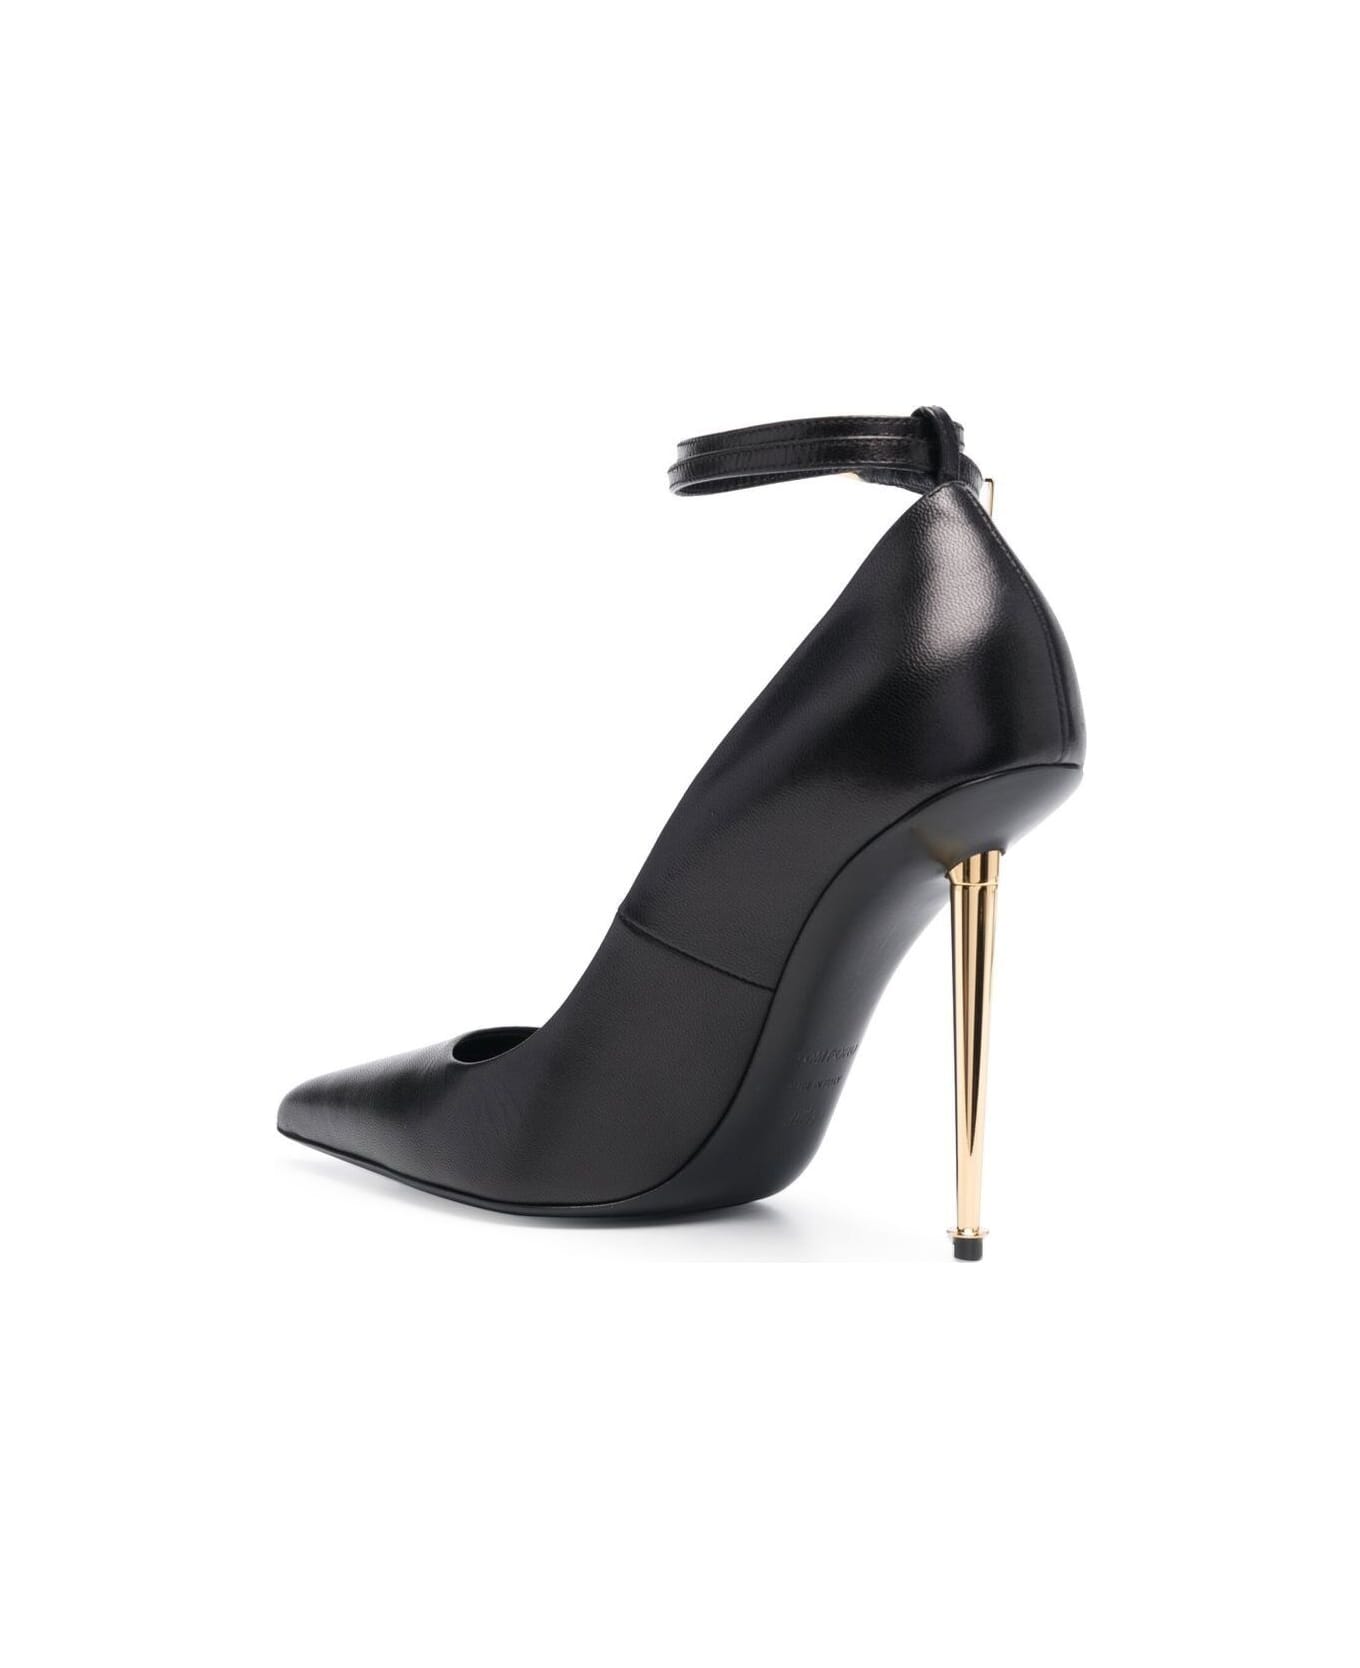 Tom Ford Black Pumps With Padlock Detail In Smooth Leather Woman - Black ハイヒール